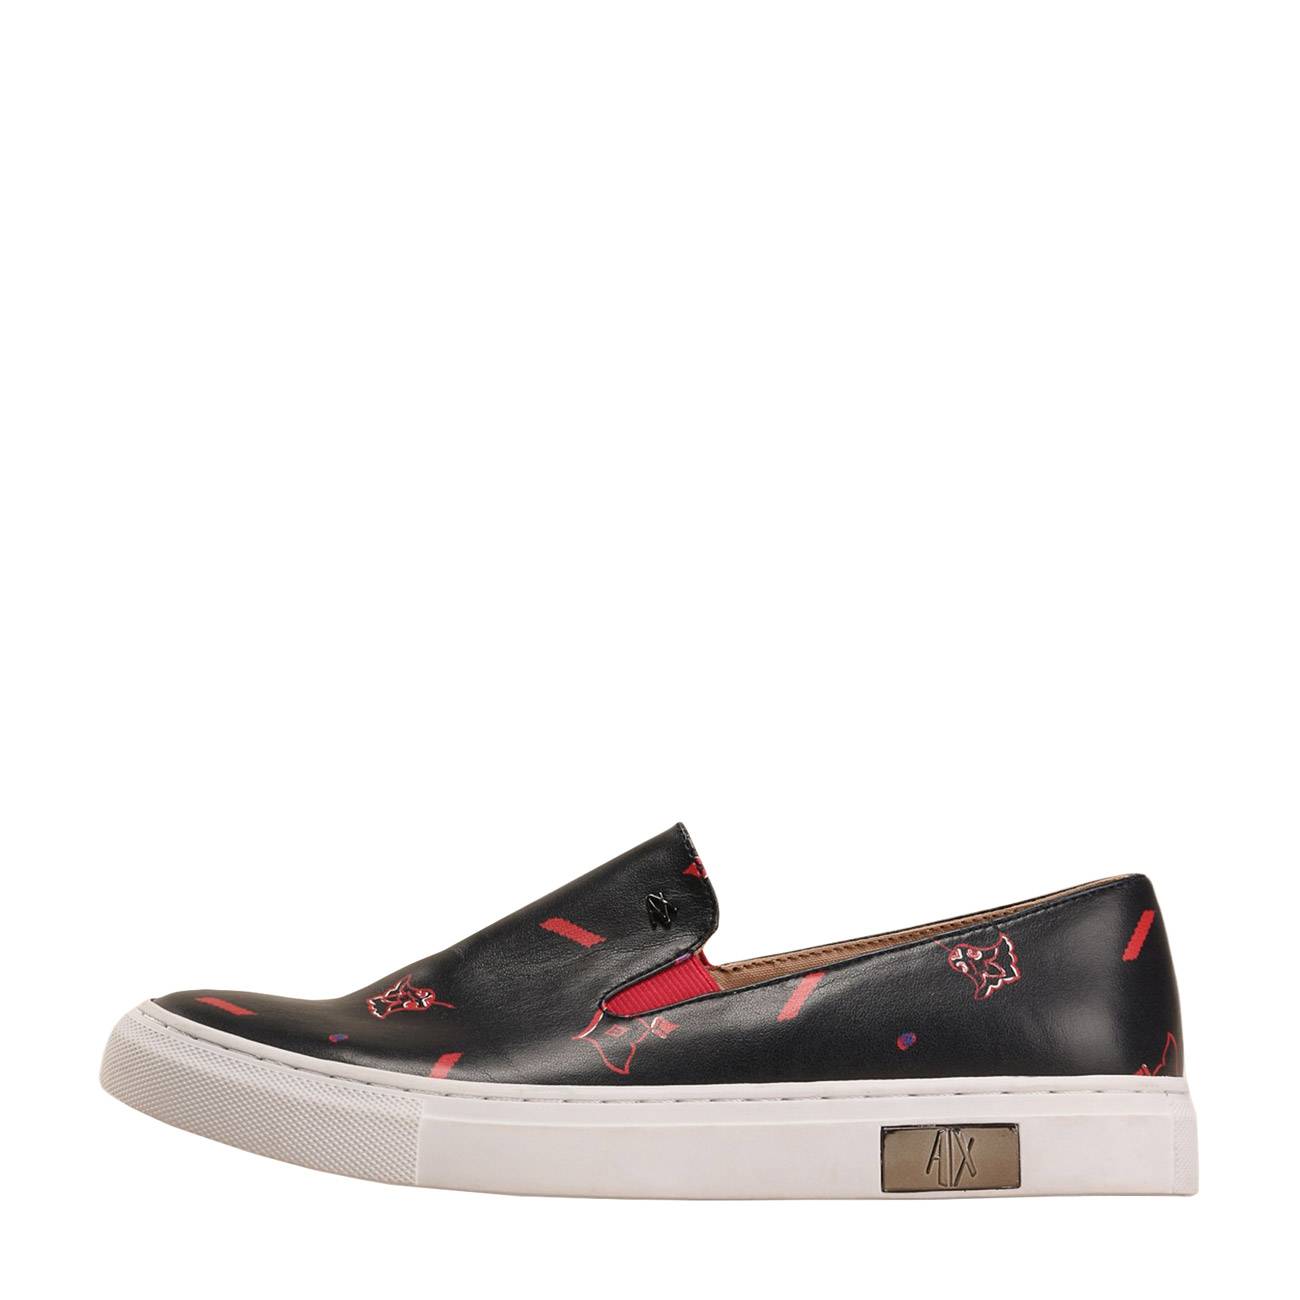 MIXED FLORAL SLIP-ON SNEAKERS 36 Armani Exchange